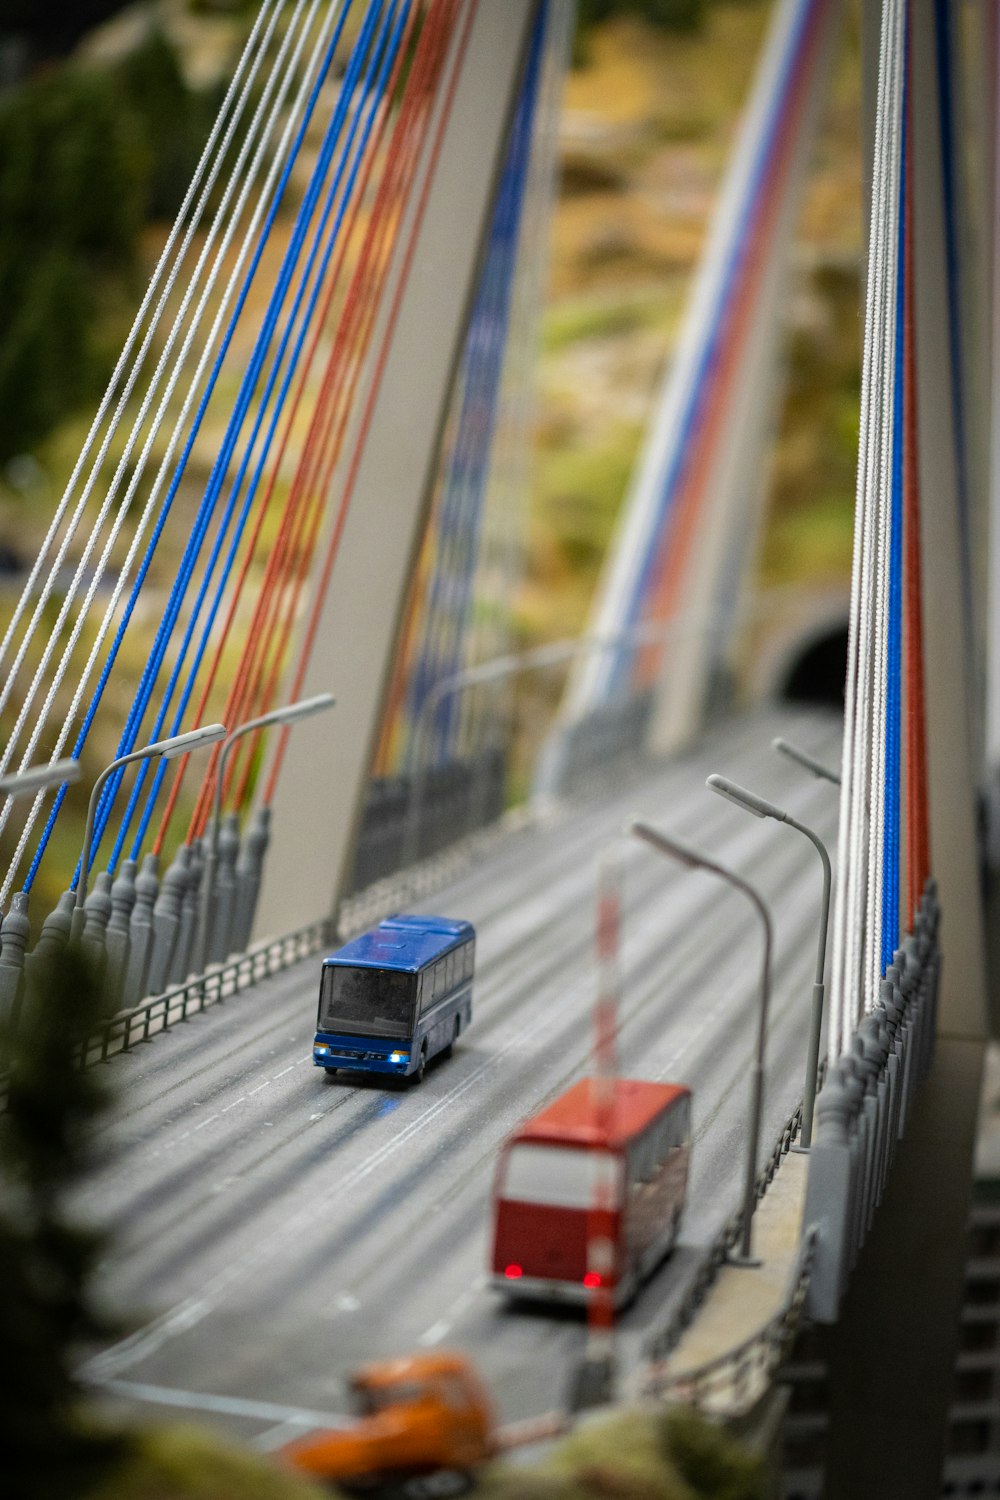 a toy model of a bridge with cars and buses on it